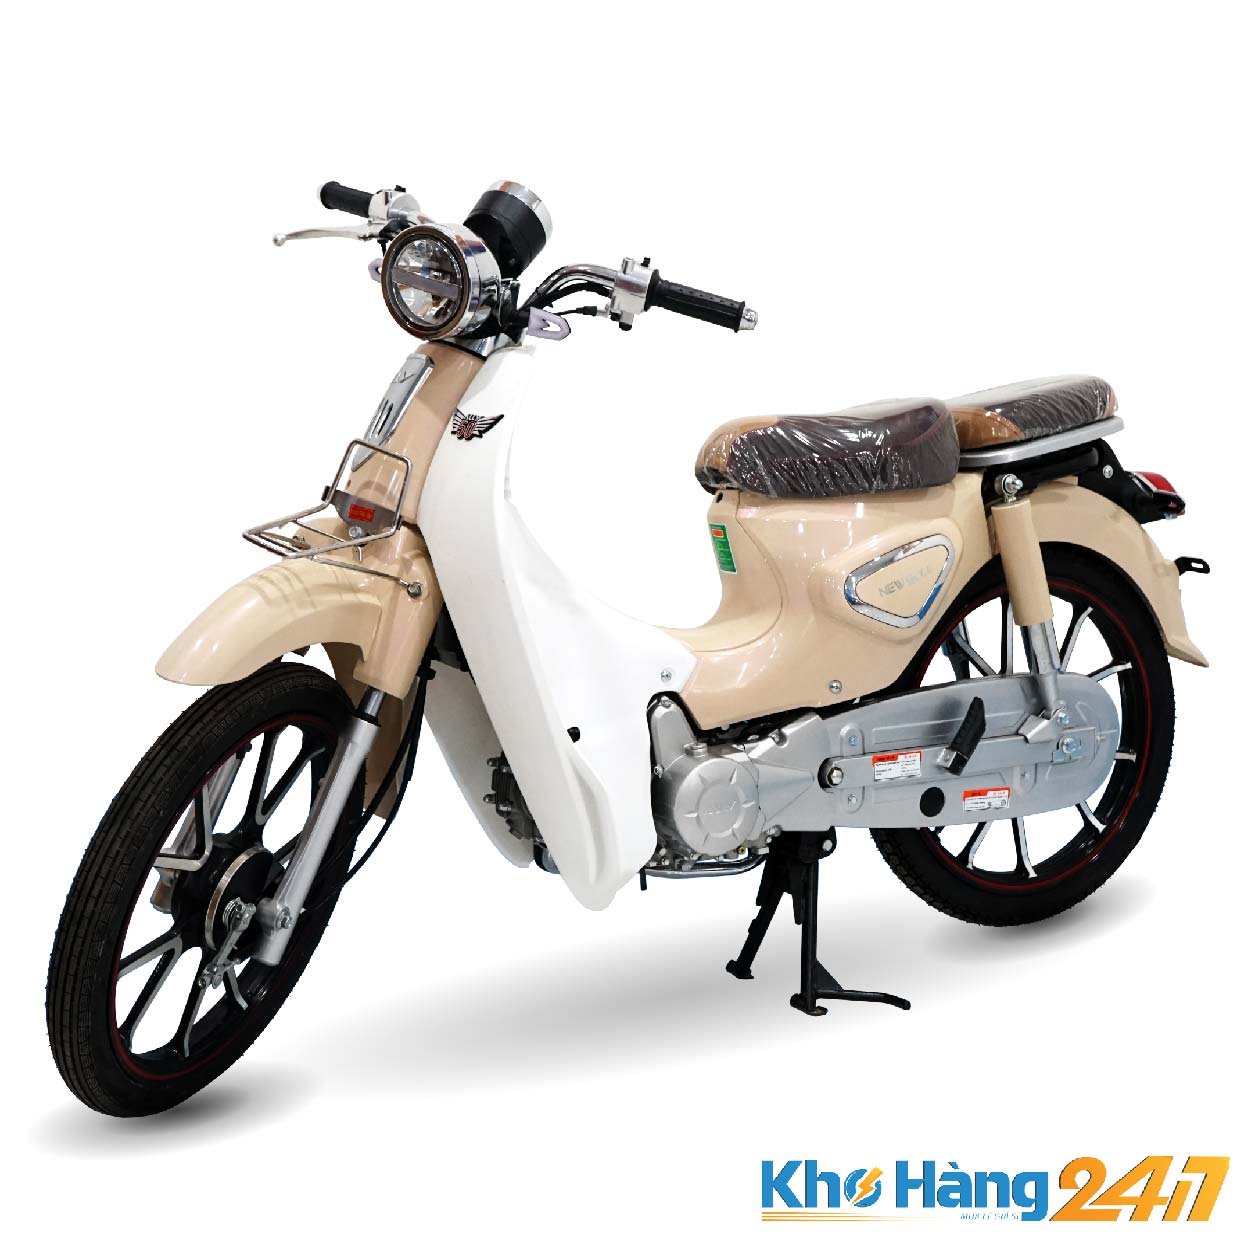 xe may cup New50LE 50cc chitiet 01 - Xe máy cub NEW50LE 50CC